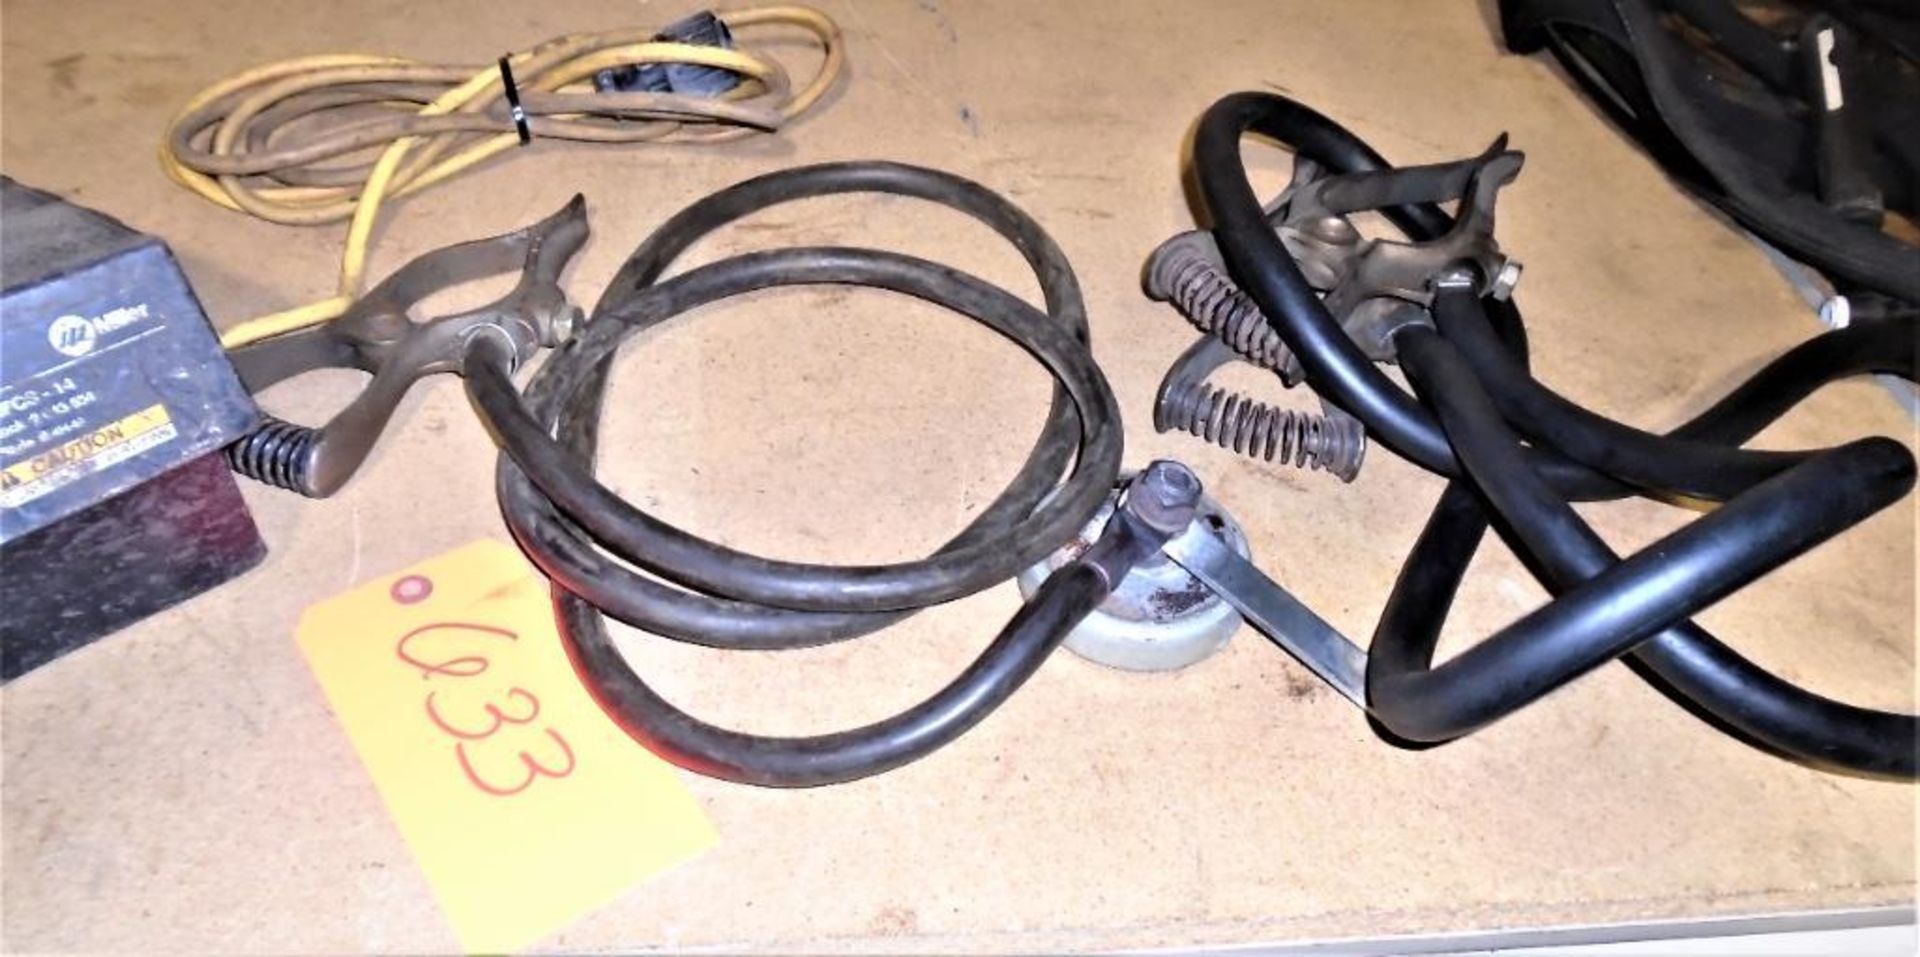 Miller HFCs-14 Foot Pedal and (2) Grounding Clamp Cables - Image 5 of 5